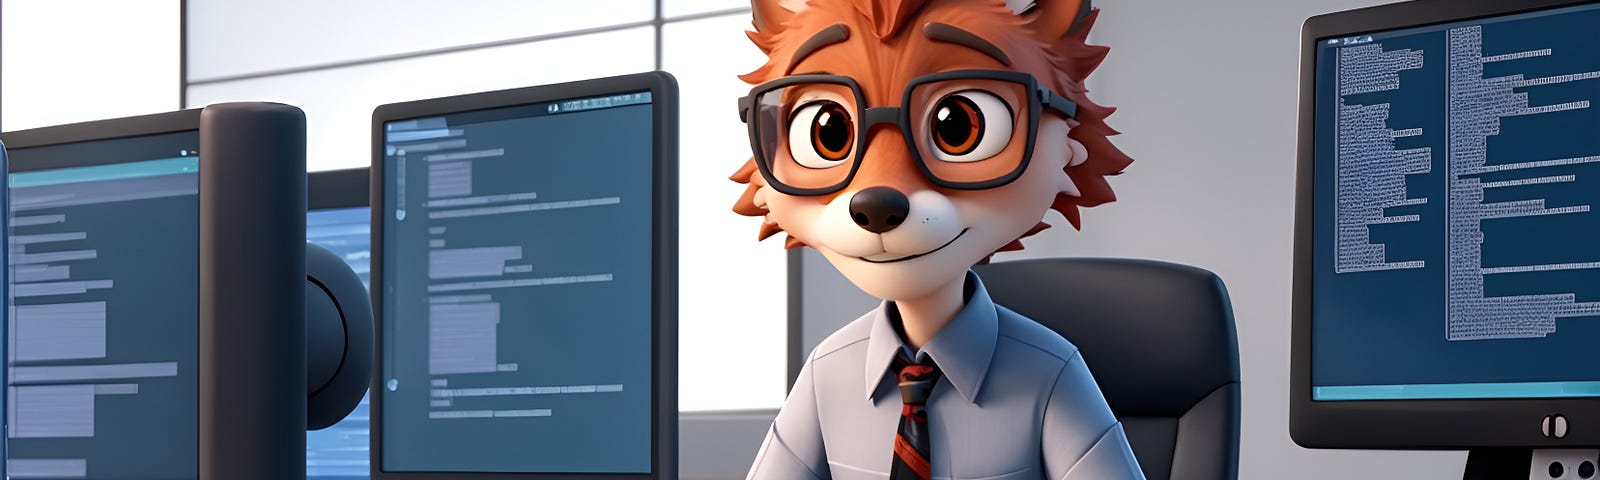 An AI-generated fox in the style of a Pixar 3D animation, wearing a light-blue shirt, and a red and navy blue striped tie, sitting at desk with several computer screens around him with what looks like computer code on them.